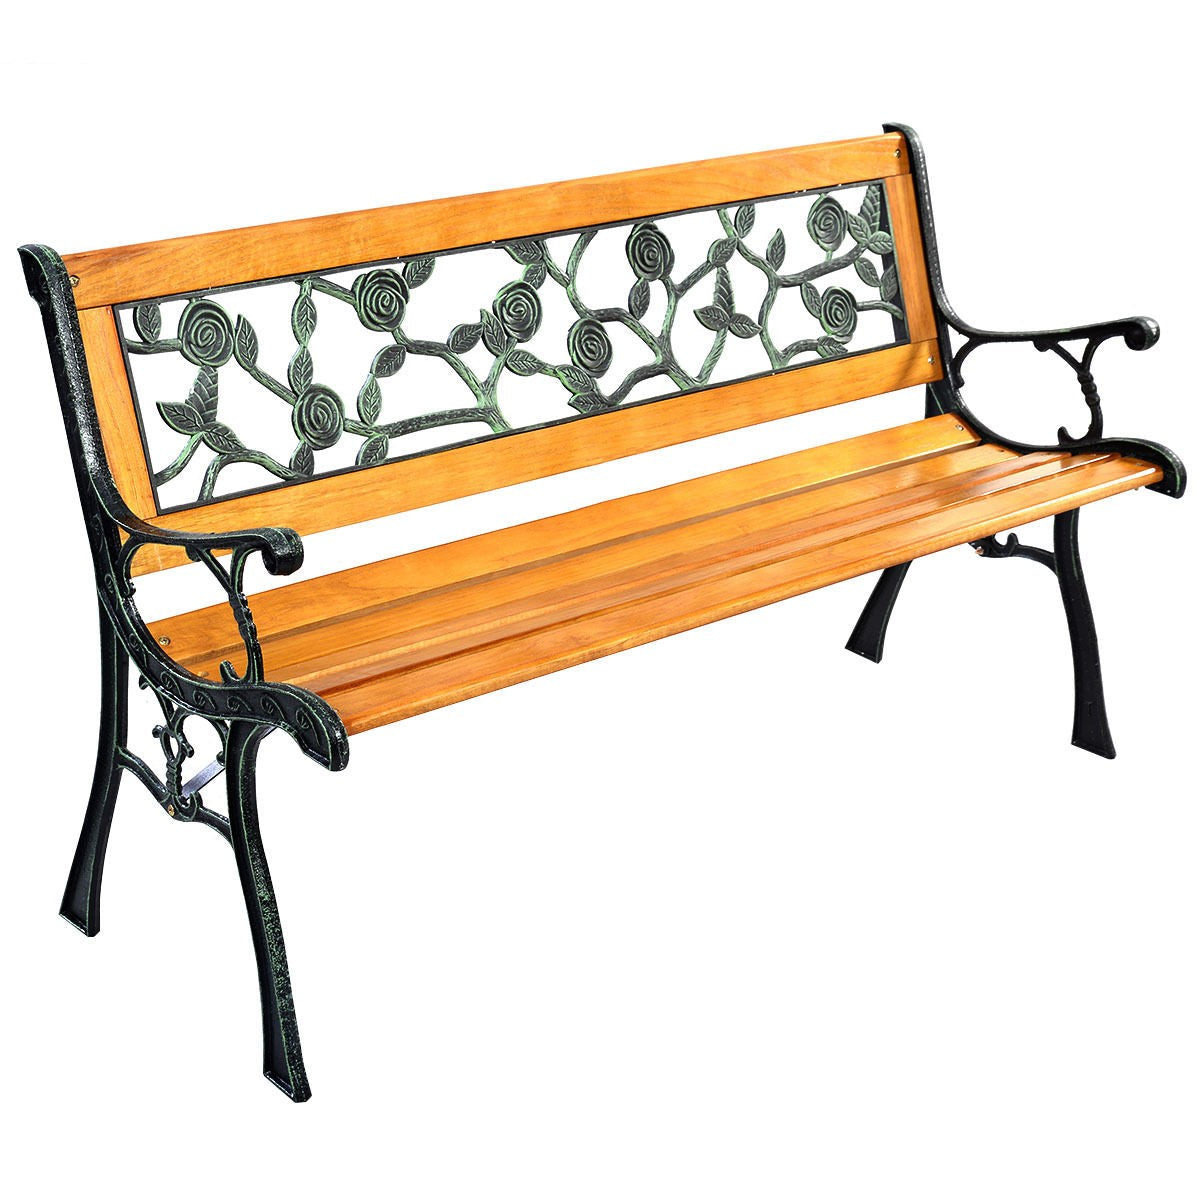 Giantex 50" Patio Park Garden Bench, Outdoor Furniture Rose Cast Iron Hardwood Frame Porch Loveseat for 2 Person Outdoor Clearance